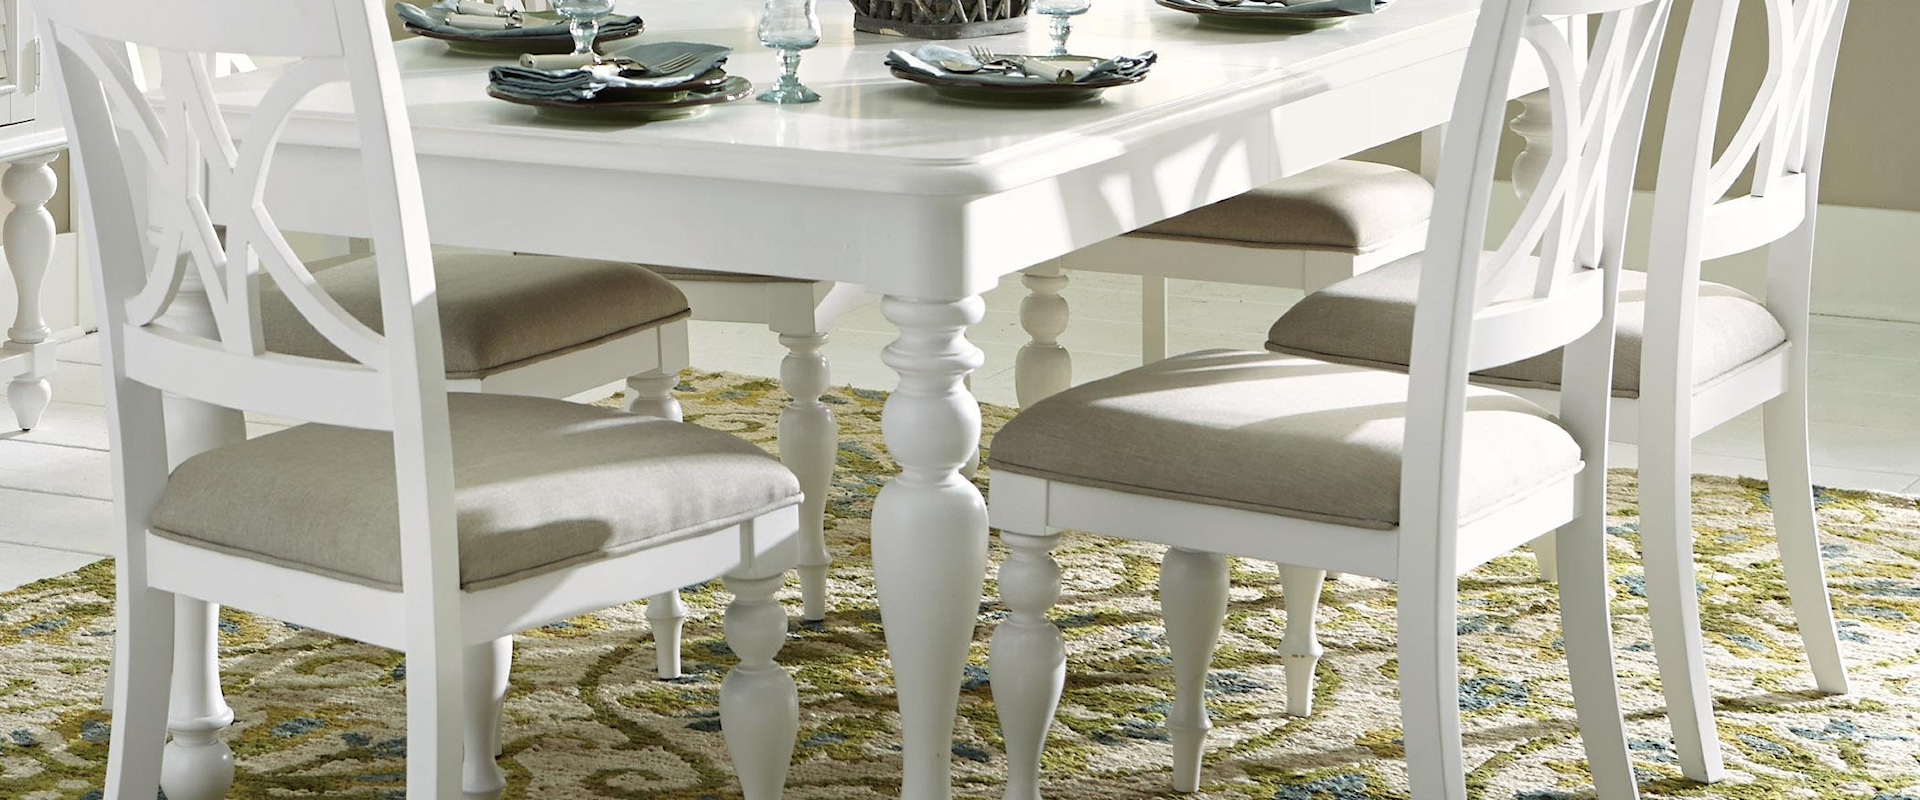 7 Piece Rectangular Table Set with Turned Legs